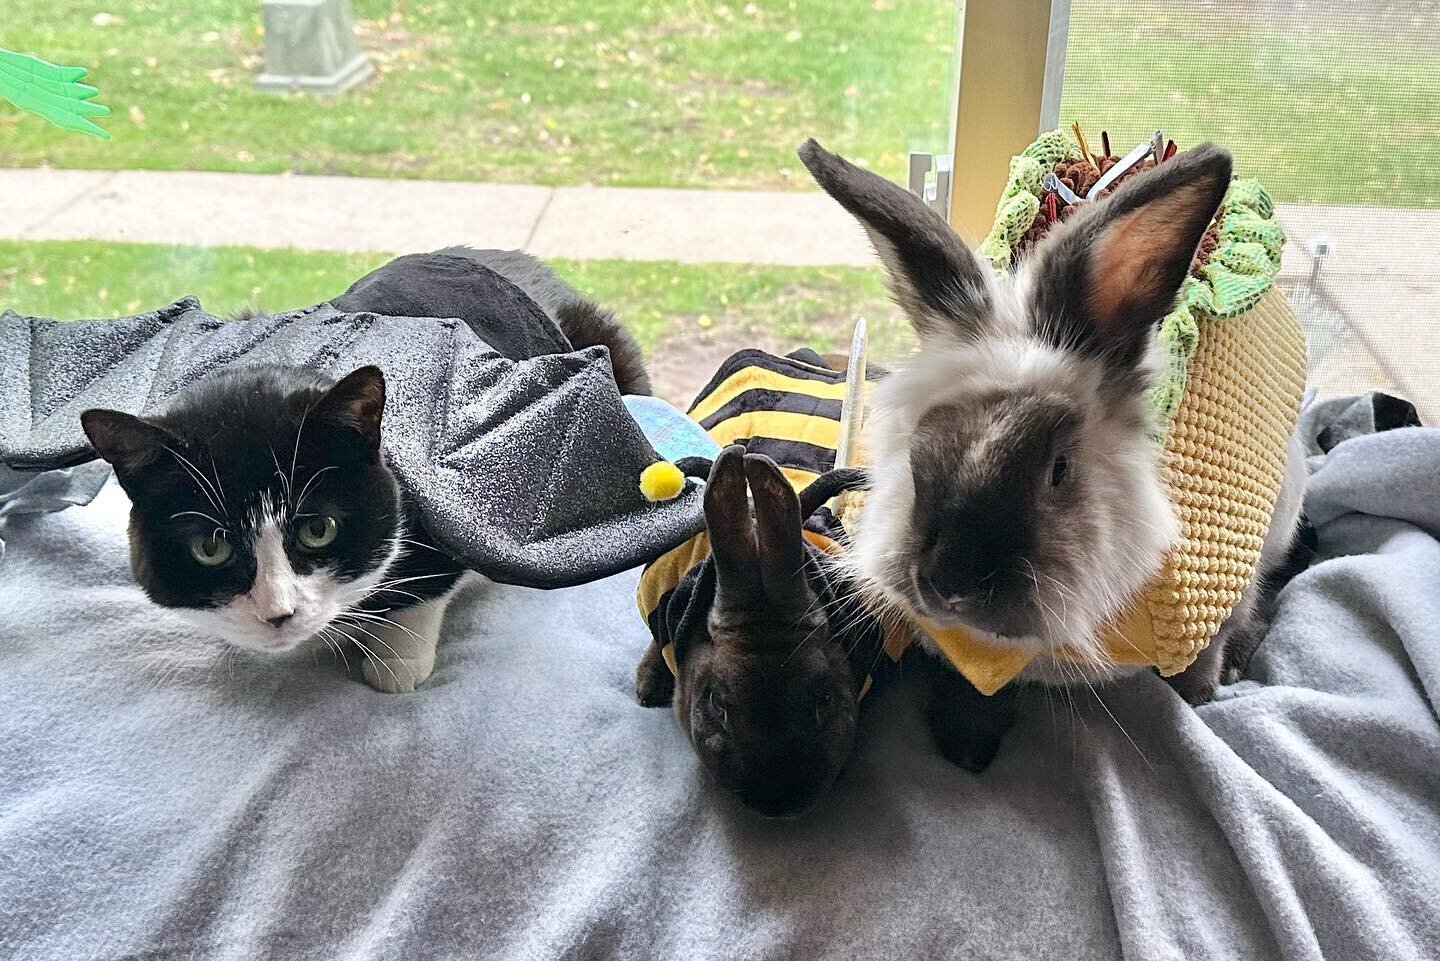 🎃Hoppy Howl-oween! 👻

🌮 Gunther the Taco
🐝P.B the Bee 
🦇Marceline the Vampire Queen 
🧙&zwj;♀️Xena the Witch
🧙 Hanz the Warlock 

💀 ☠️